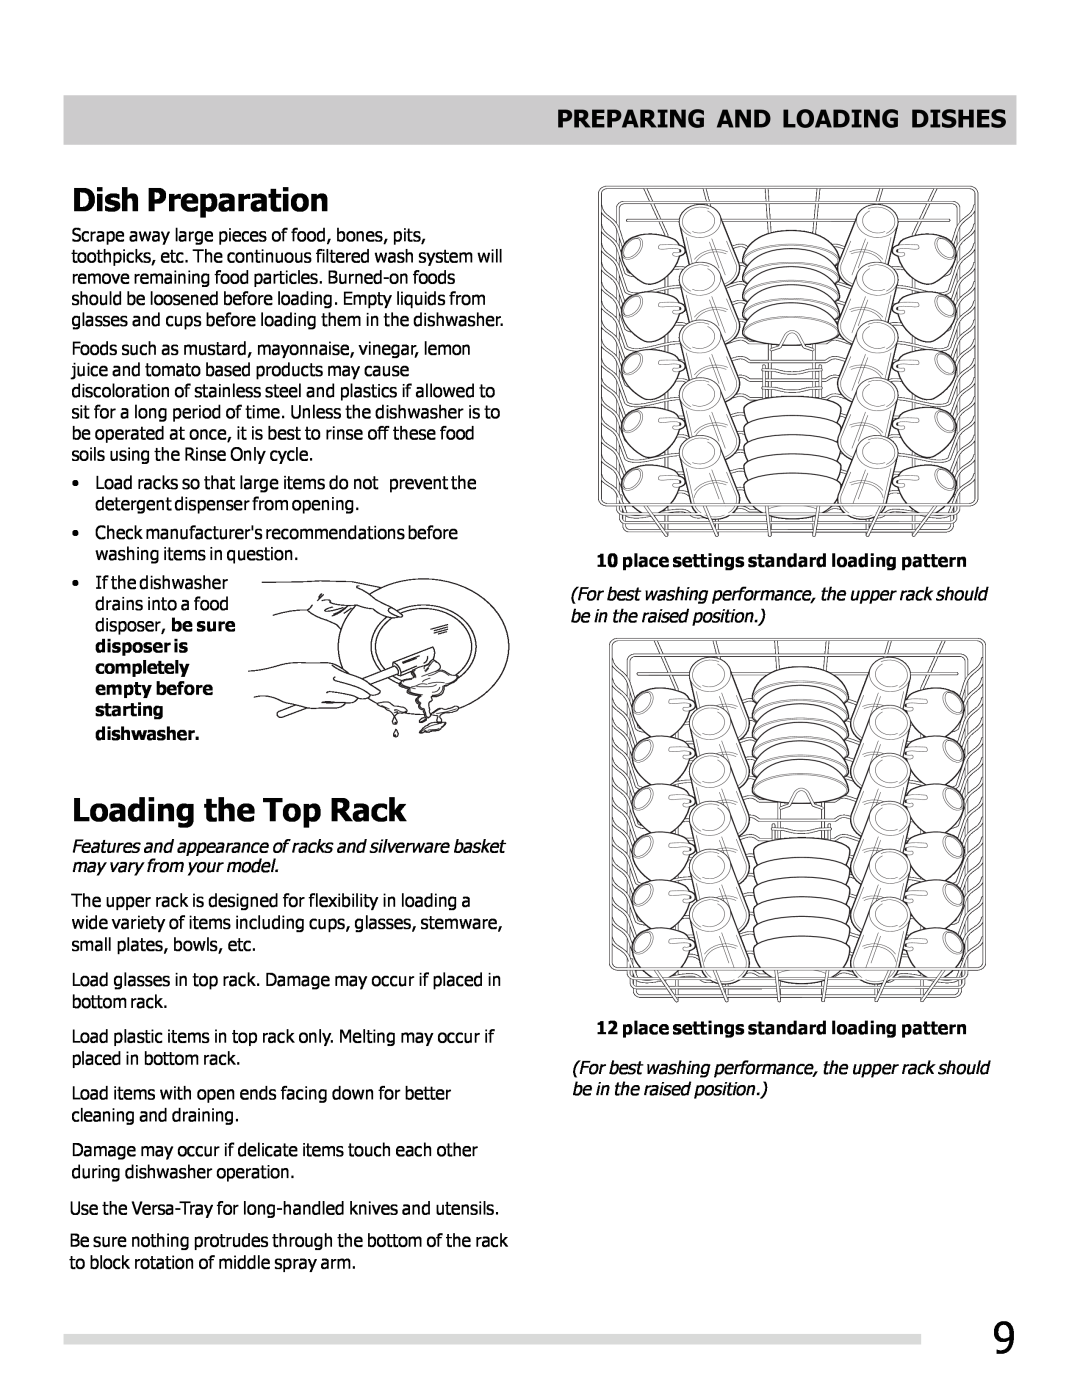 Frigidaire FGHD2465NB manual Dish Preparation, Loading the Top Rack, Preparing And Loading Dishes, starting dishwasher 